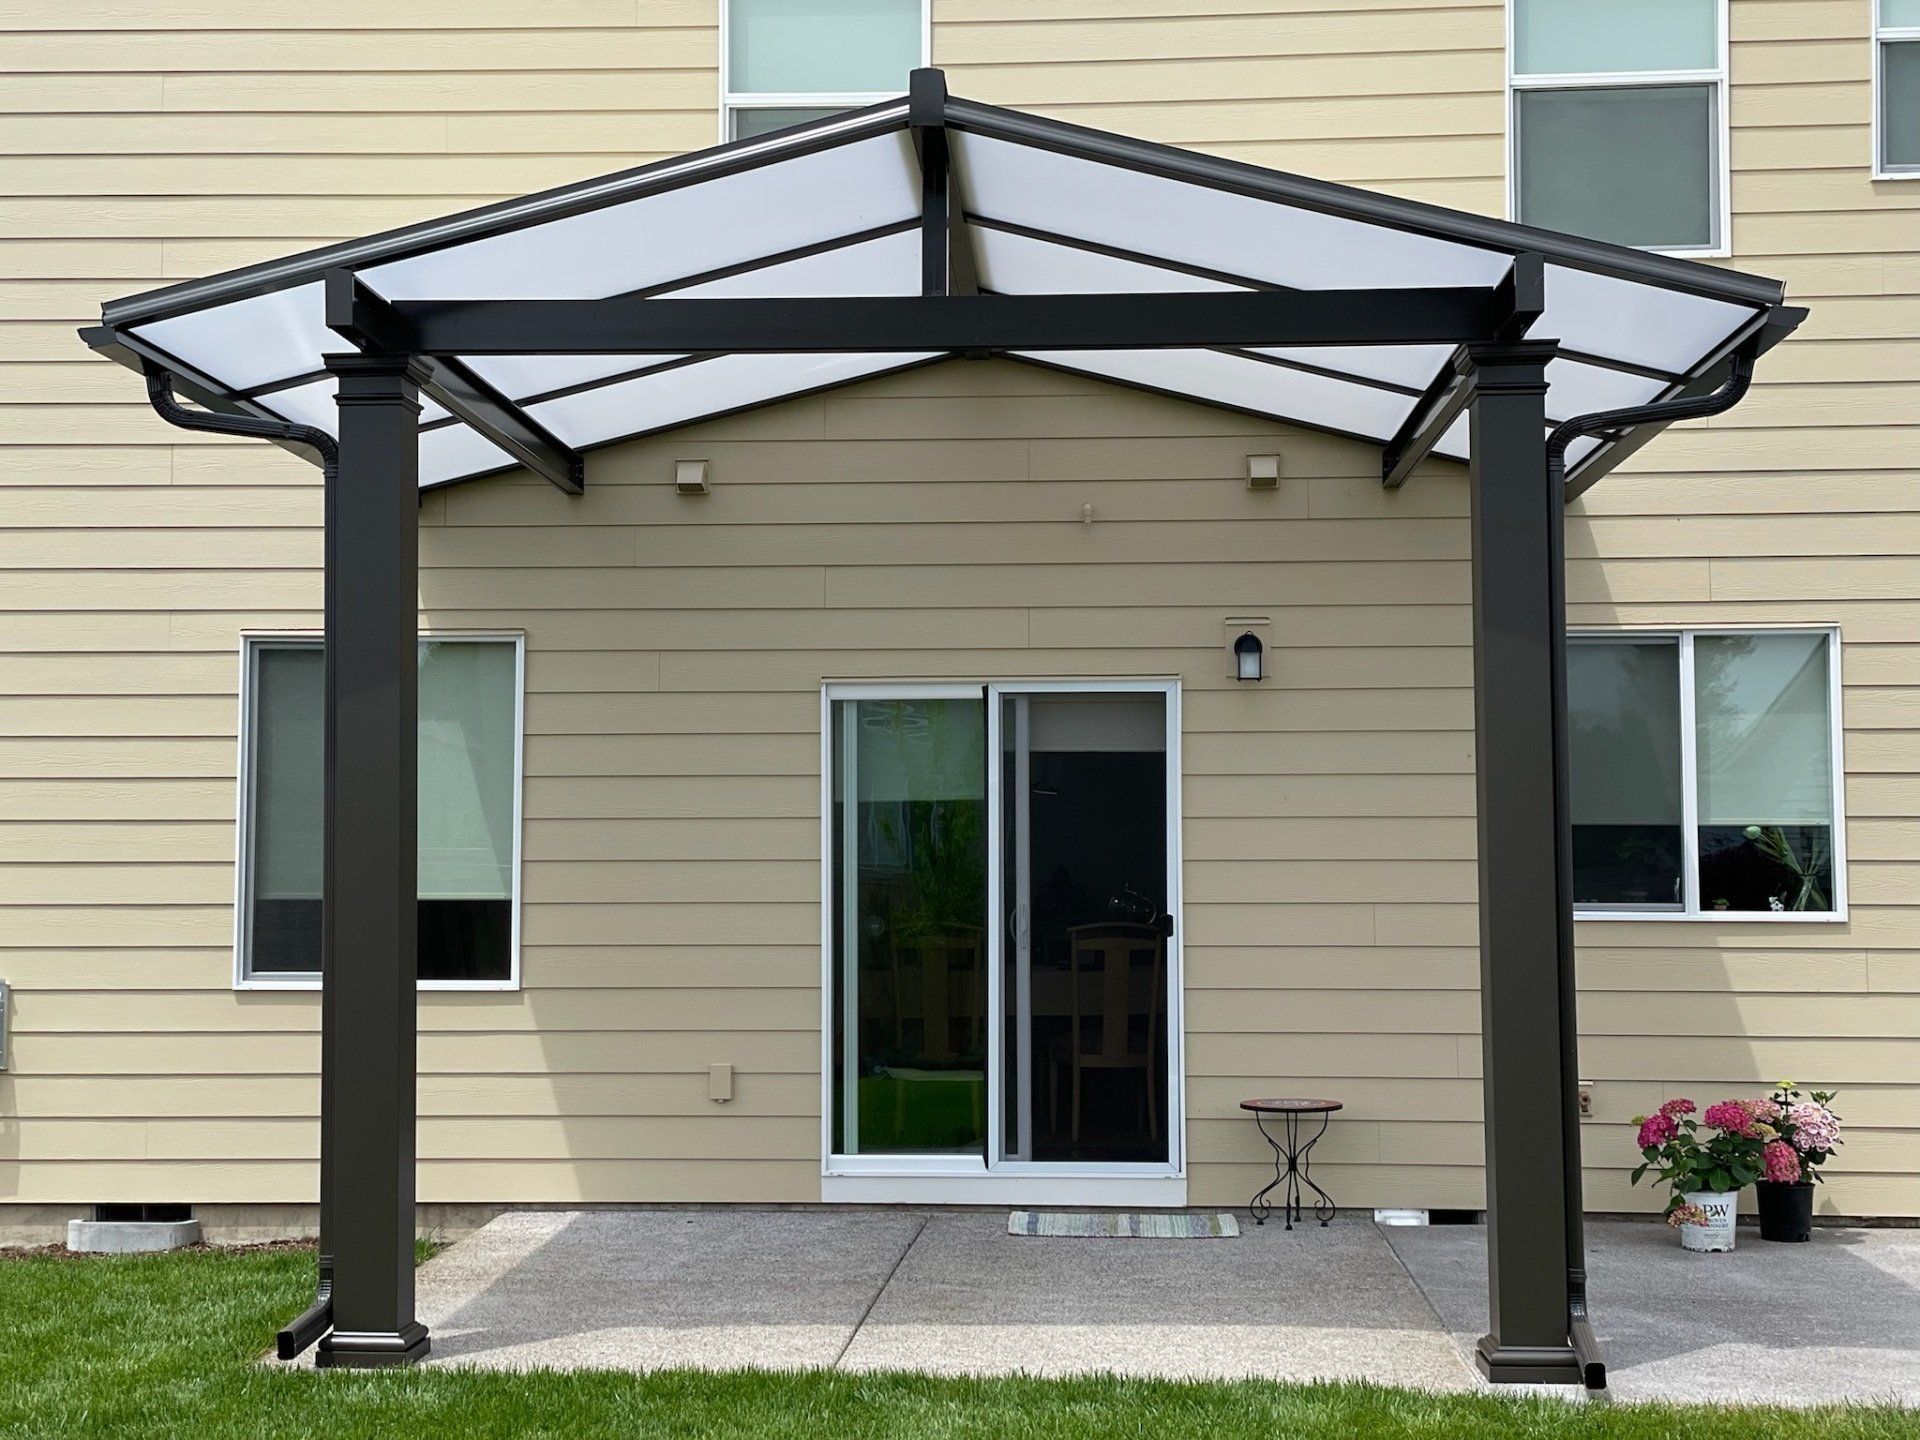 Patio Cover Contractor in Tualatin - Crown Patio Covers Process